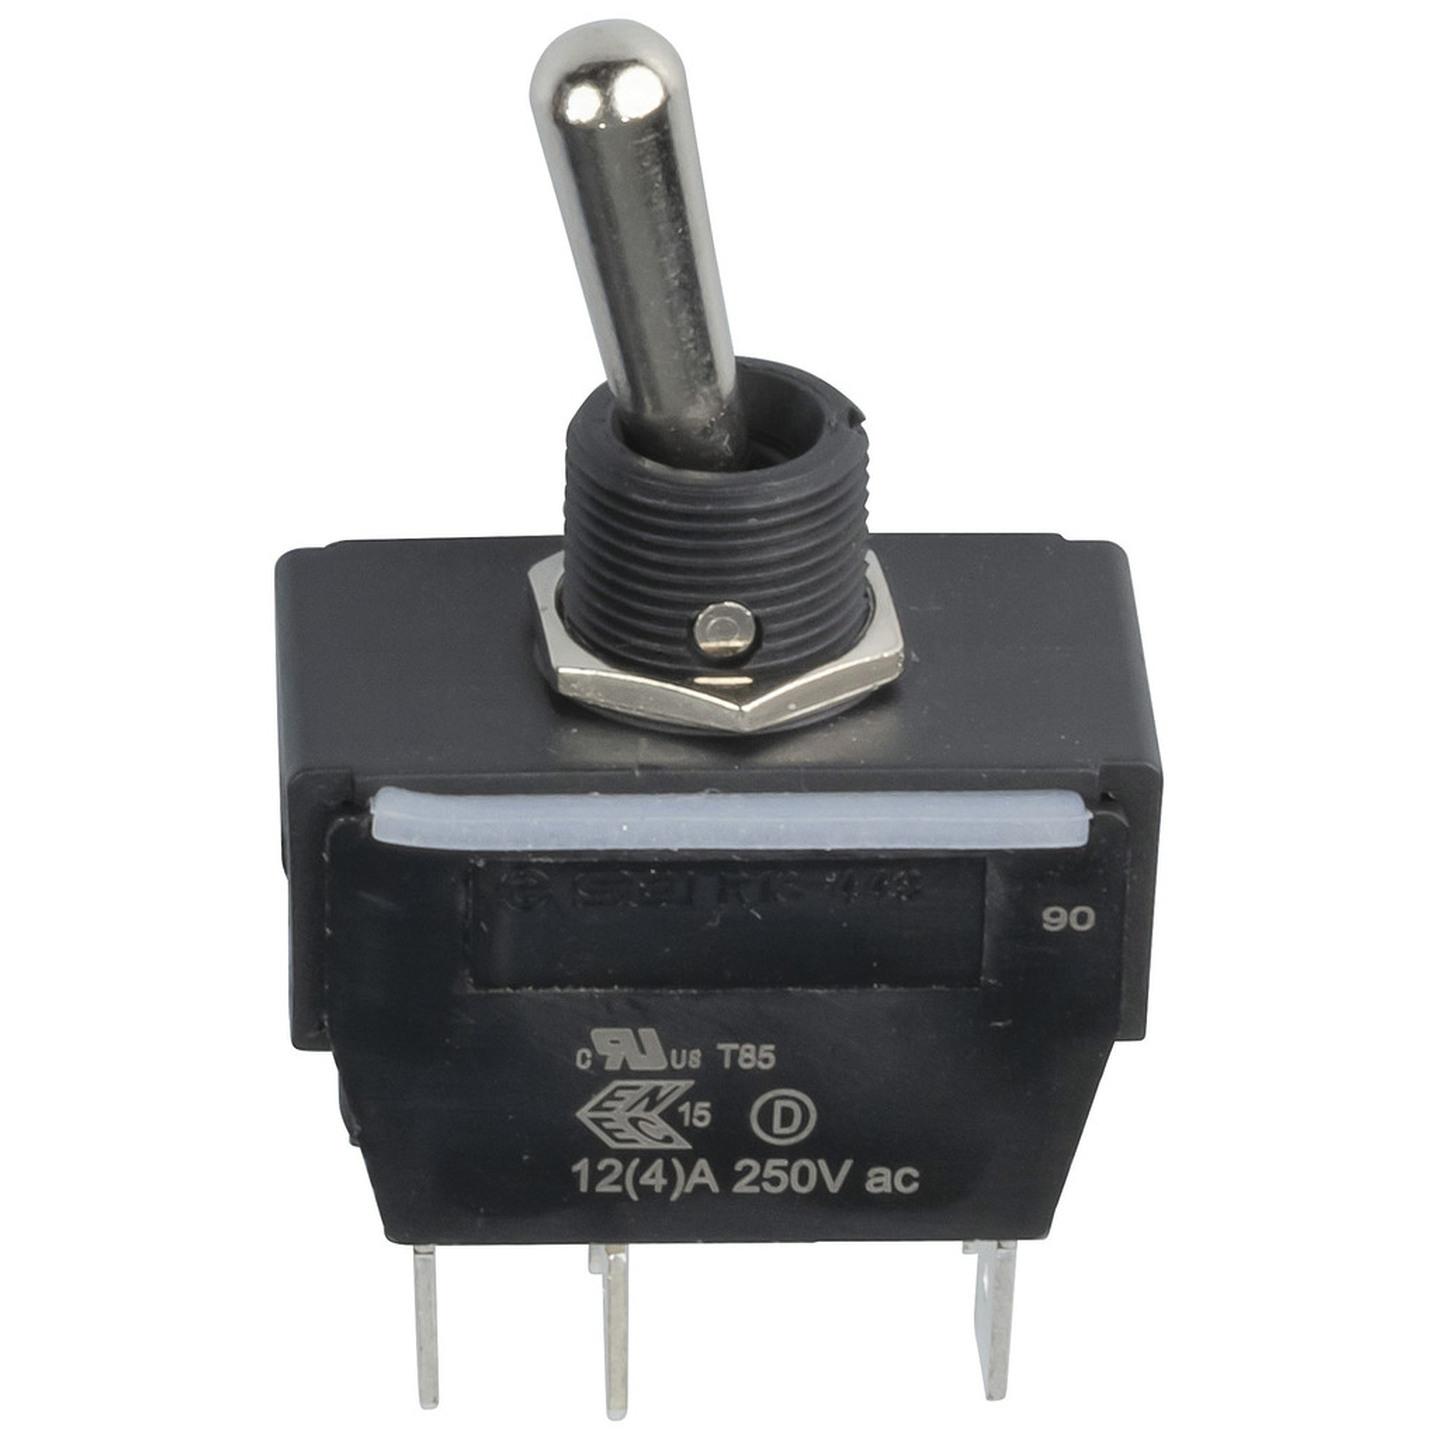 DPDT IP56 Heavy Duty Toggle Switch